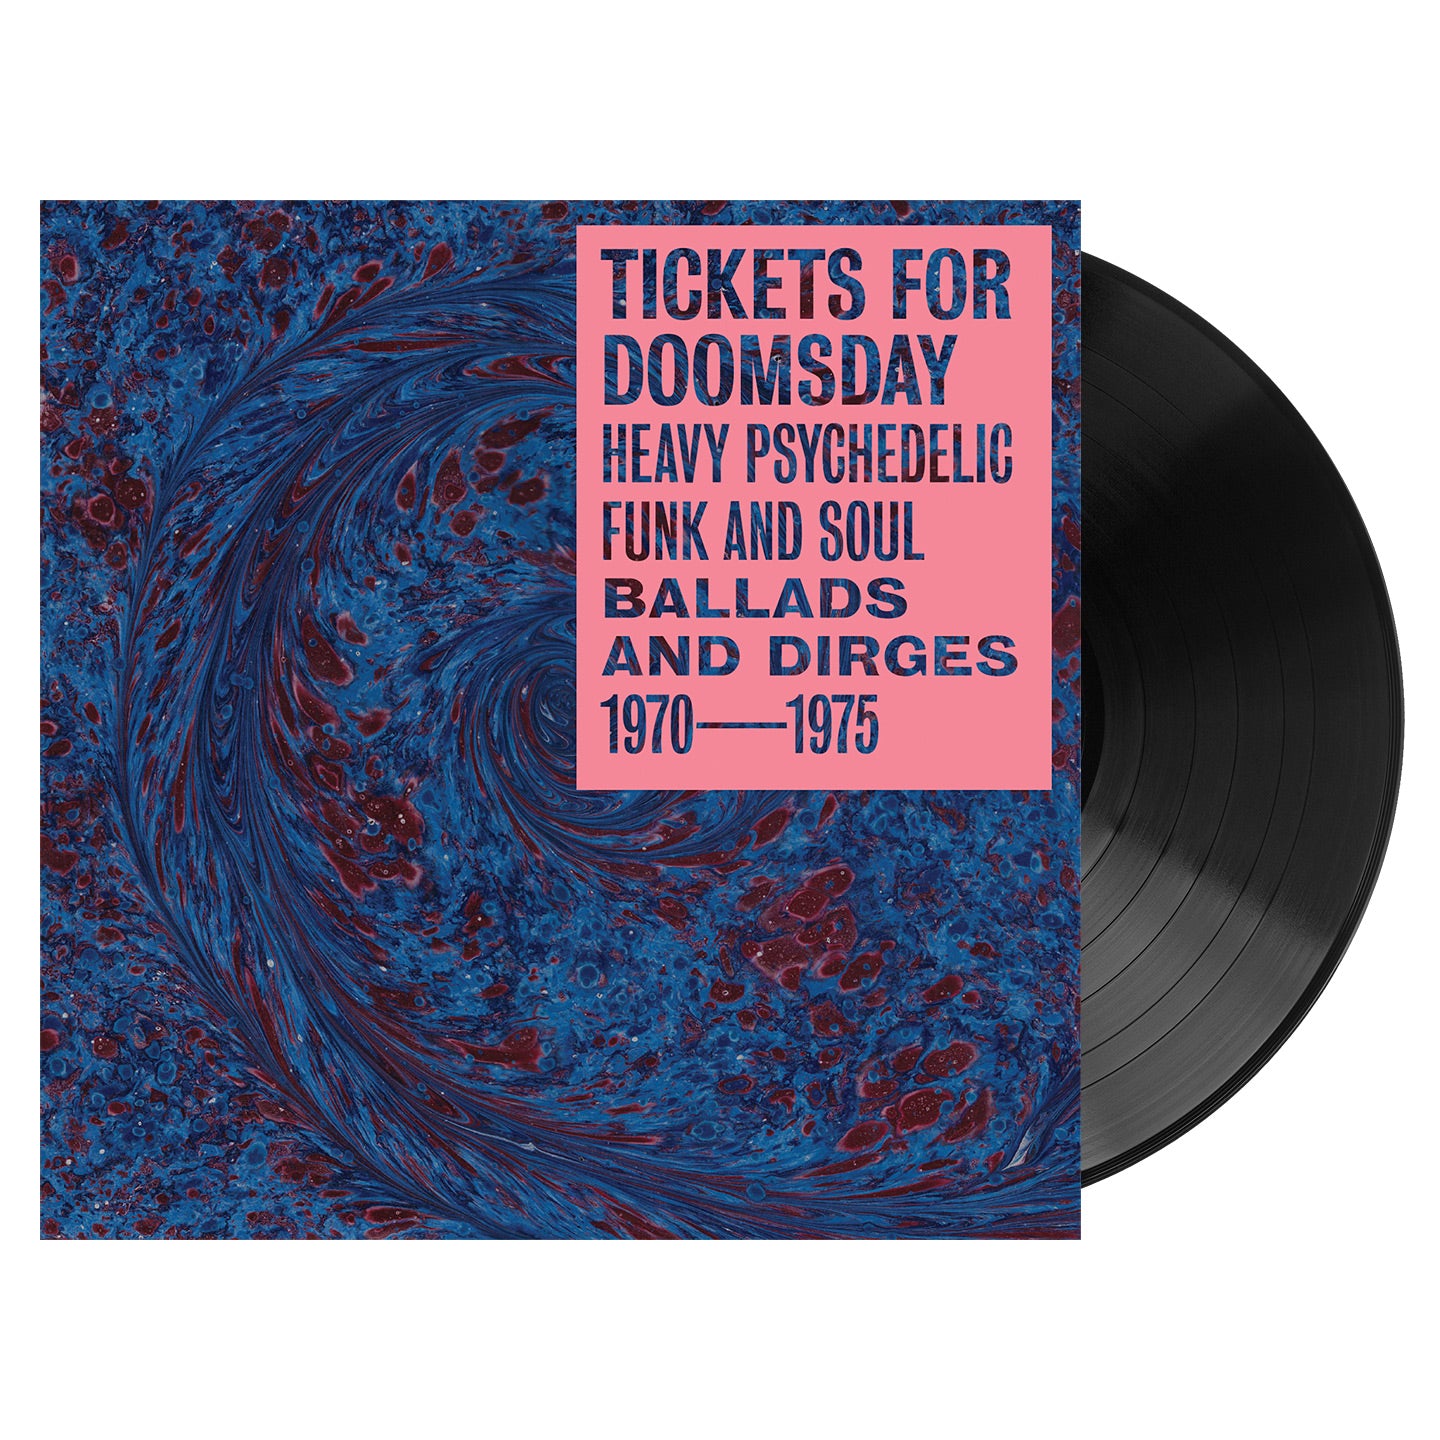 Tickets for Doomsday: Heavy Psychedelic Funk, Soul Ballads & Dirges, 1970-1975